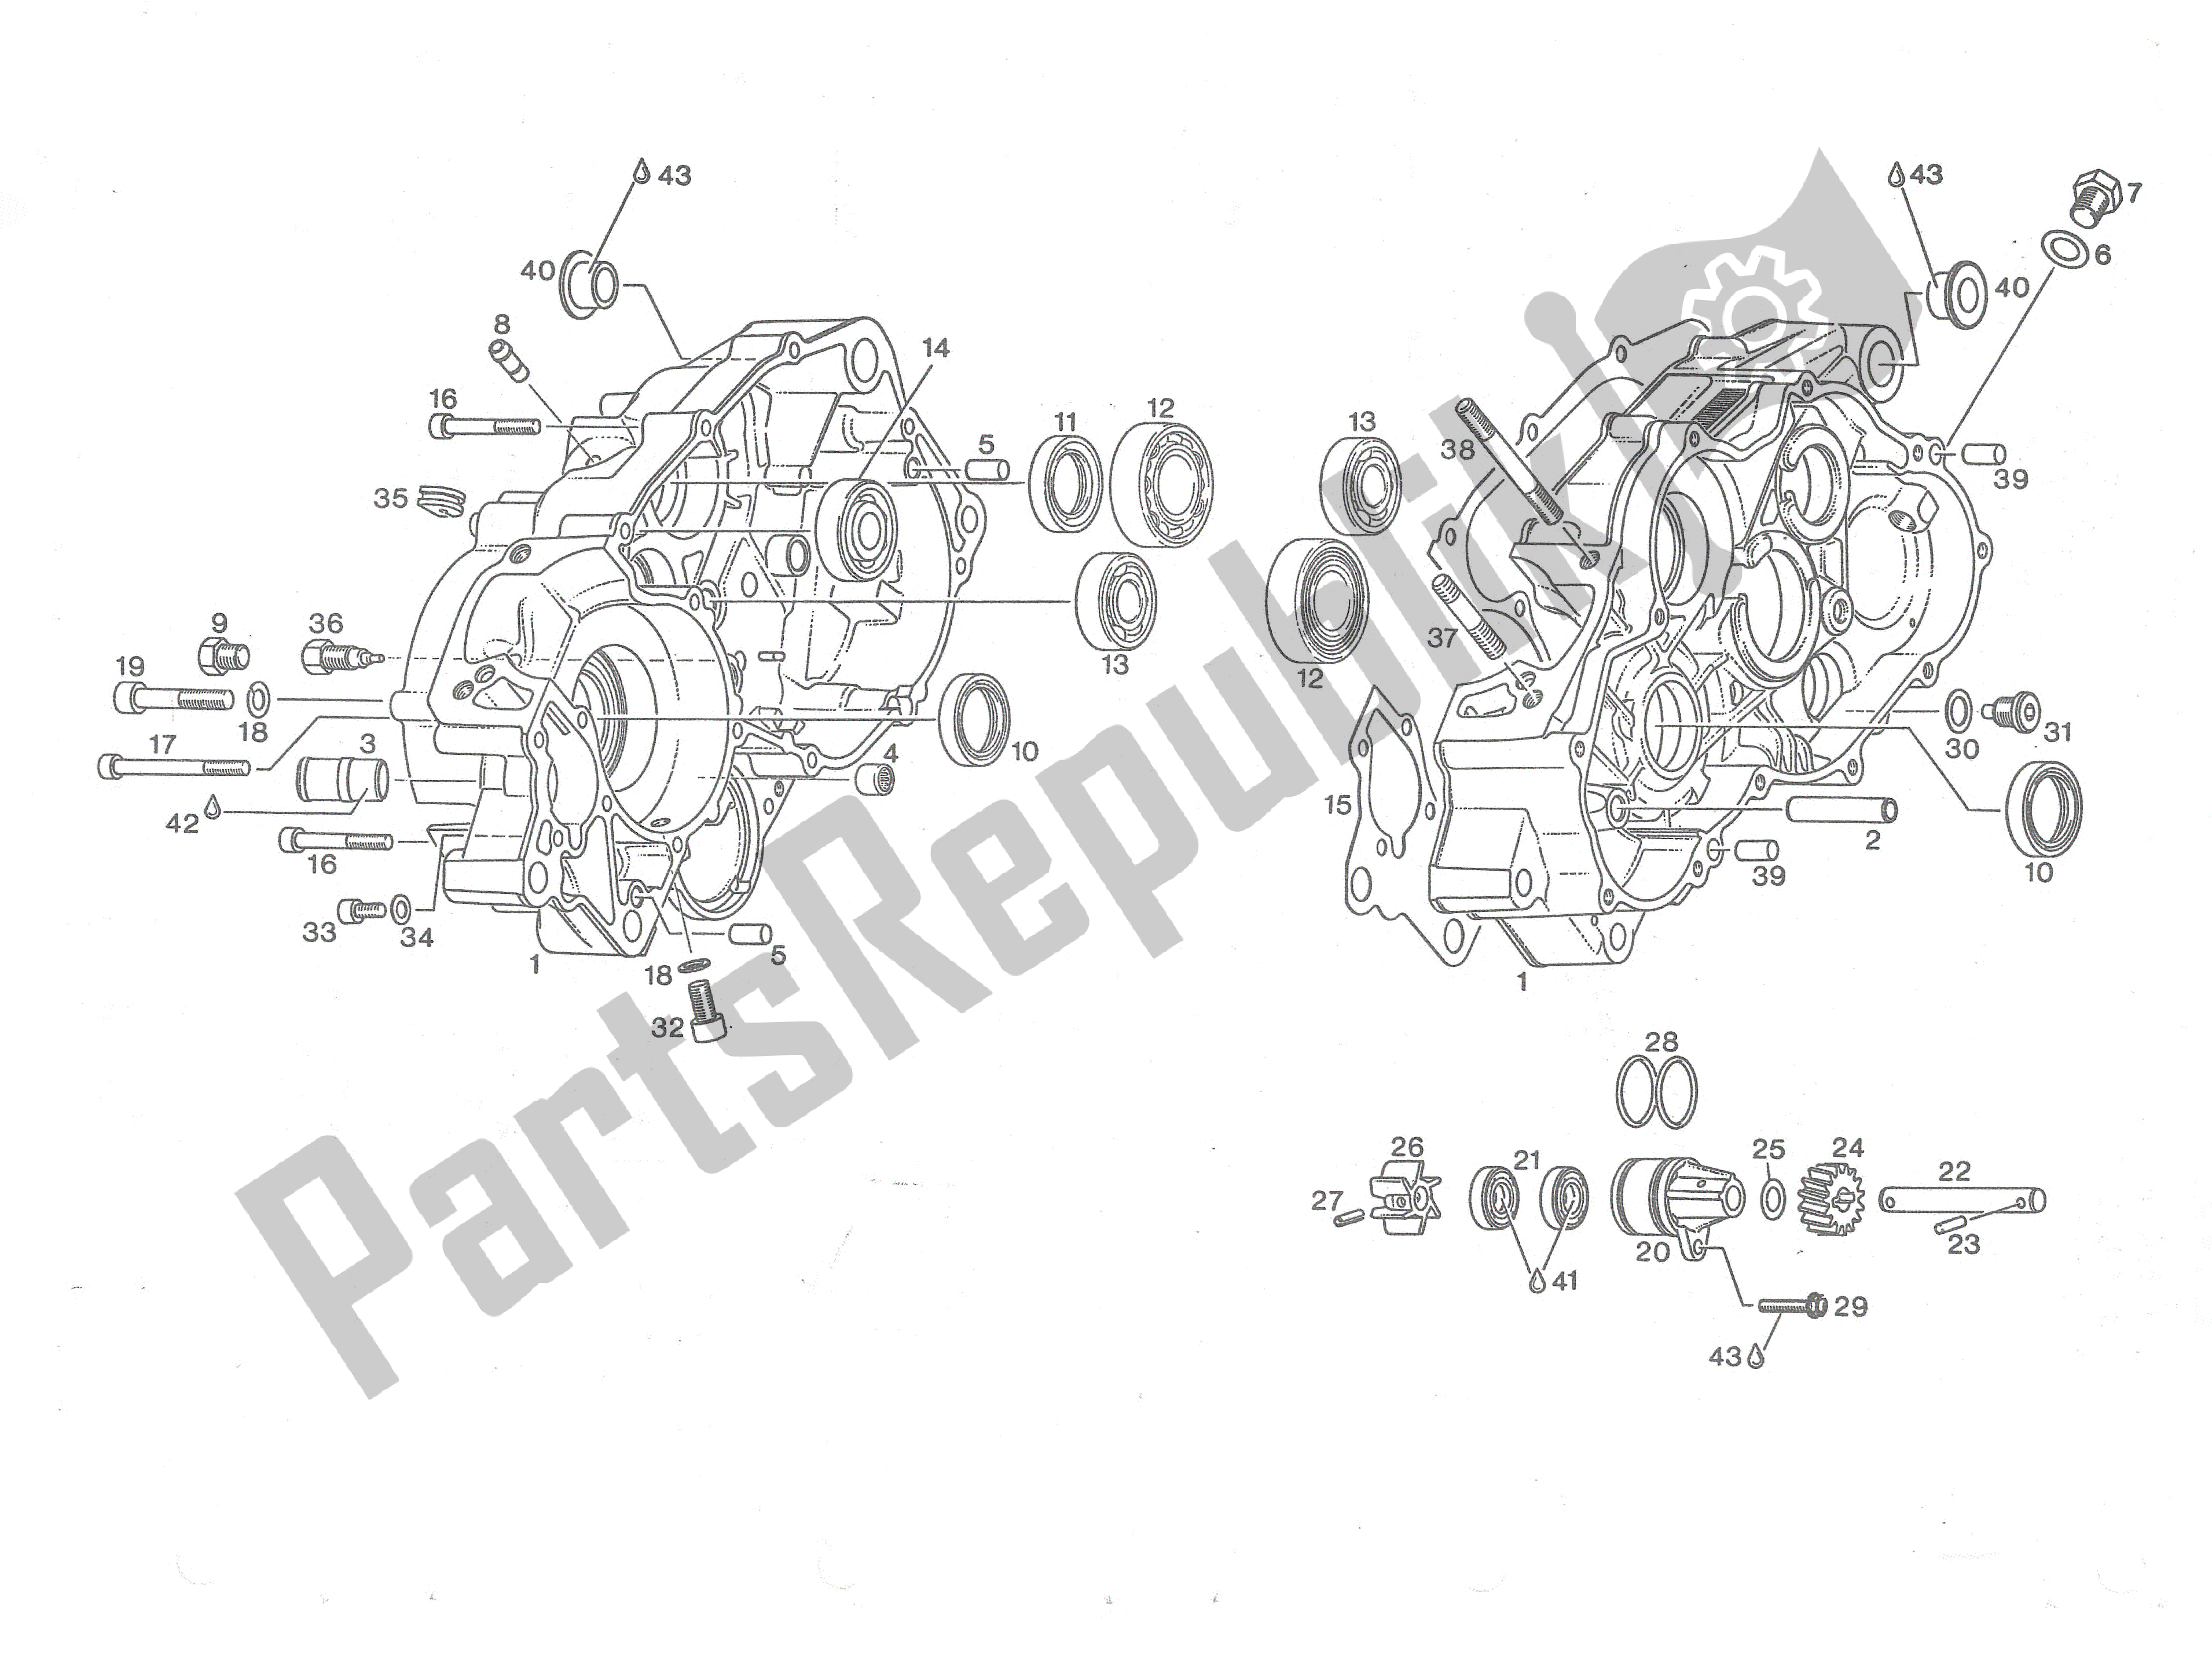 All parts for the Crankcase, Gear Bearings, Water Pump of the Aprilia Rotax 123 125 1991 - 1992